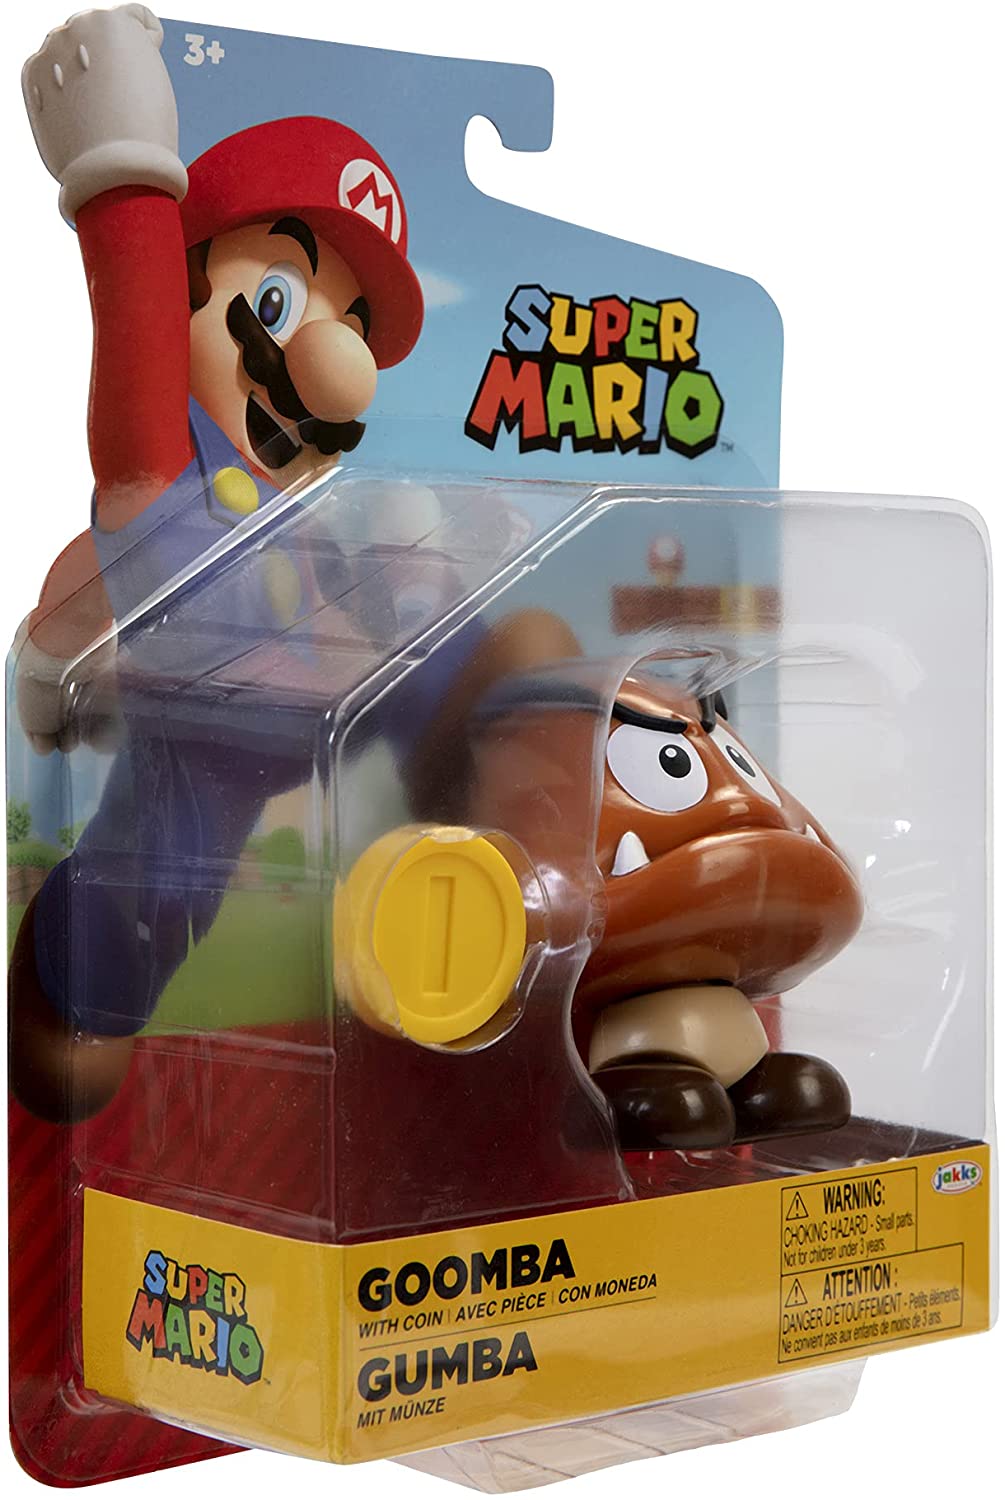 Jakks Pacific World of Nintendo Super Mario Goomba 4-inch Collectible Toy with Coin Accessory